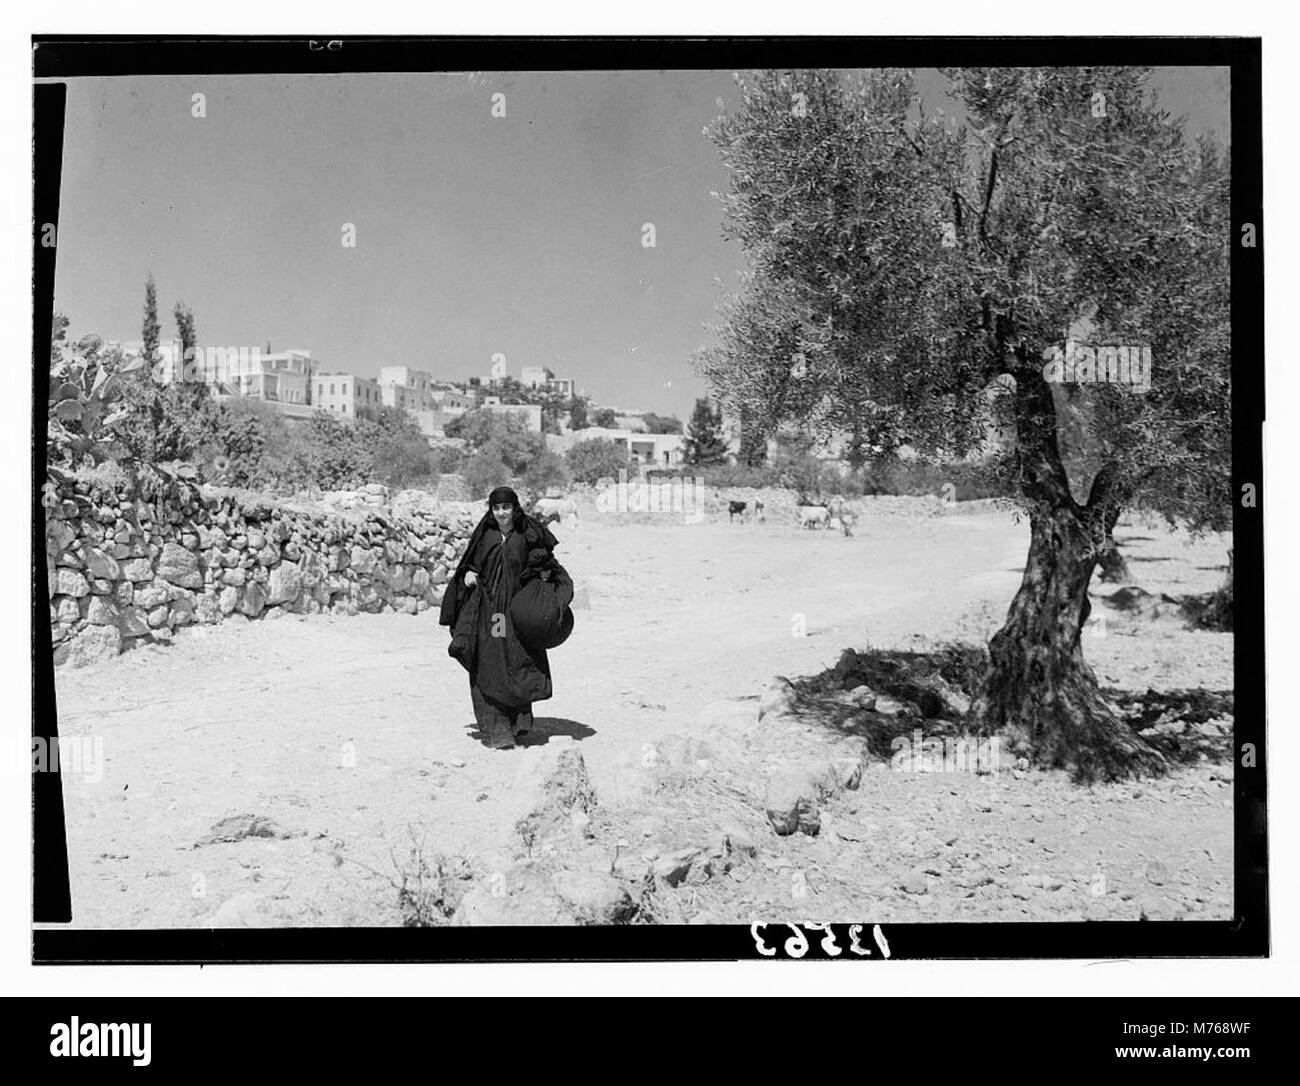 'Ruth' story. 'Ruth' story. 'Ruth' carrying off wheat measured by 'Boaz' (Sirvart), Bethlehem in background LOC matpc.12964 Stock Photo